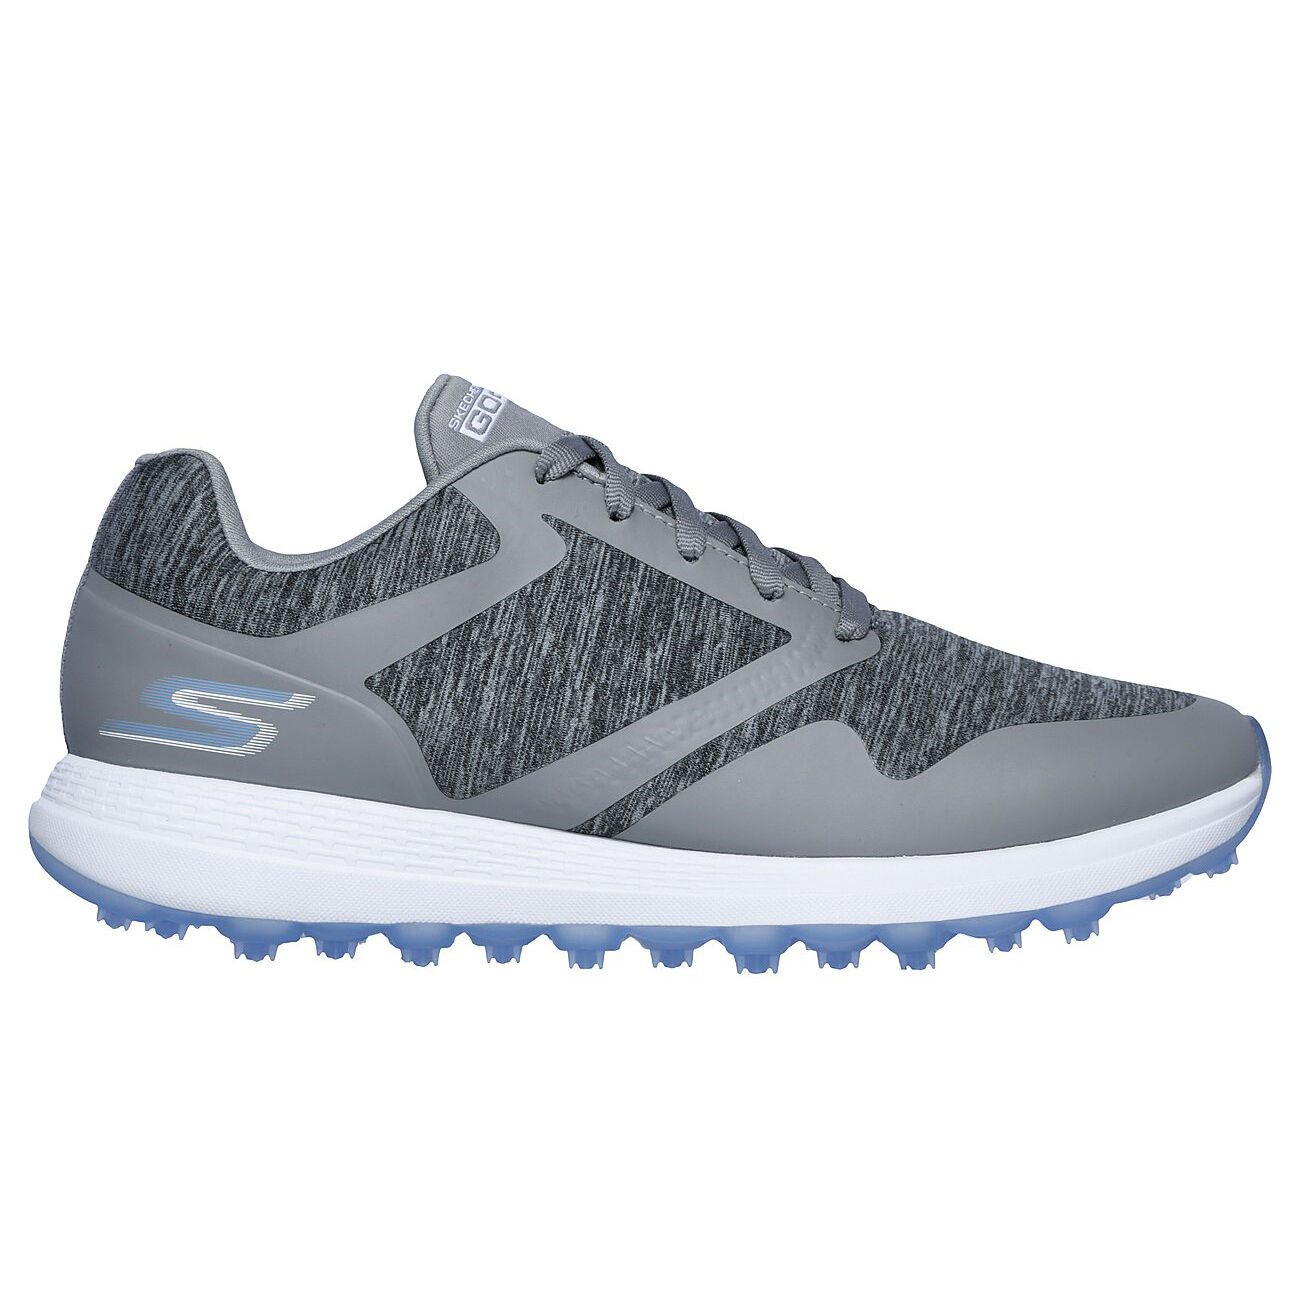 skechers golf shoes wide fitting